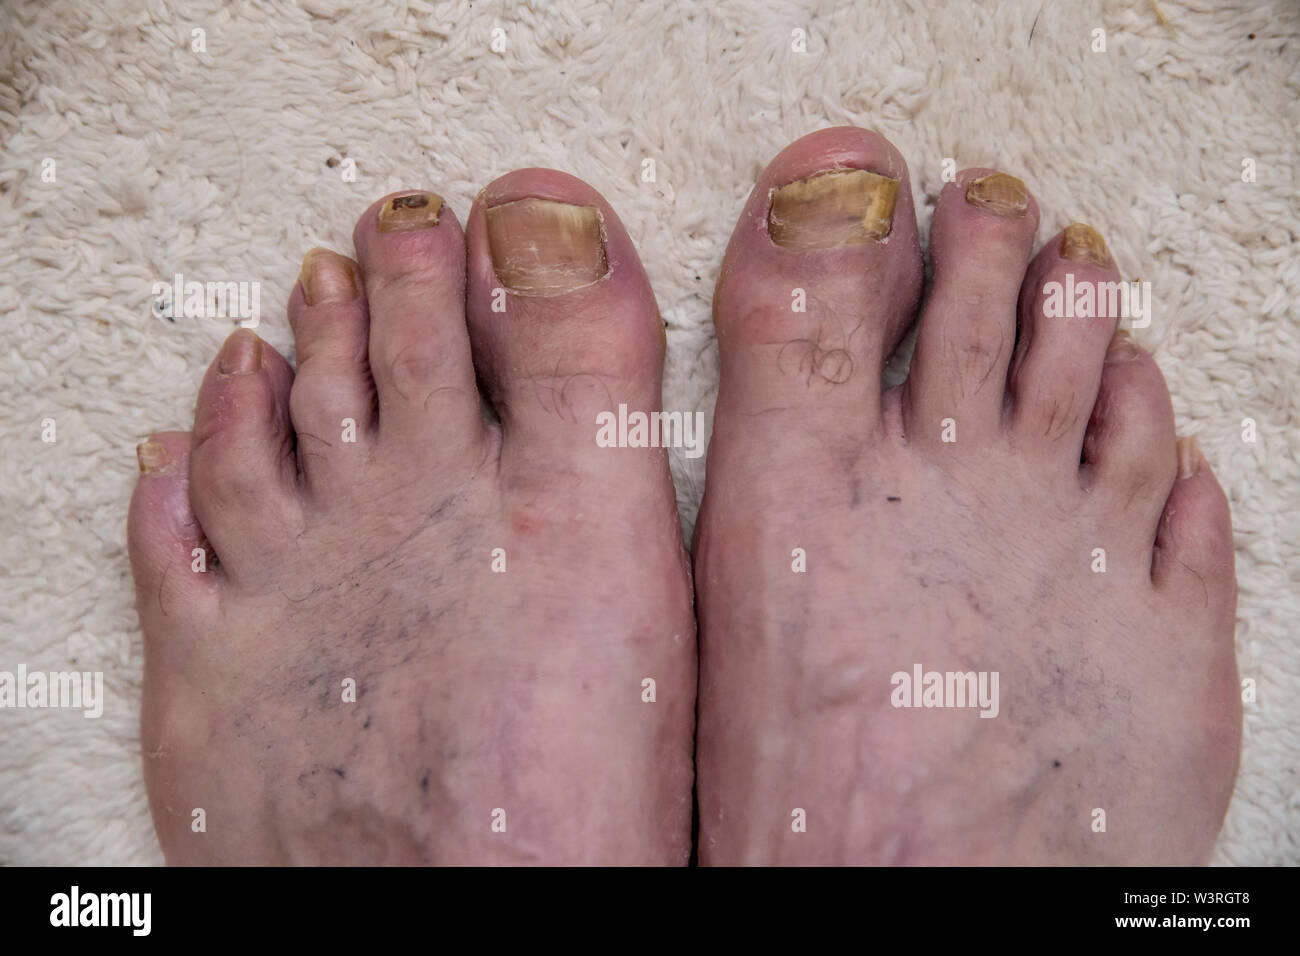 Onychomycosis with fungal nail infection two feet. Stock Photo